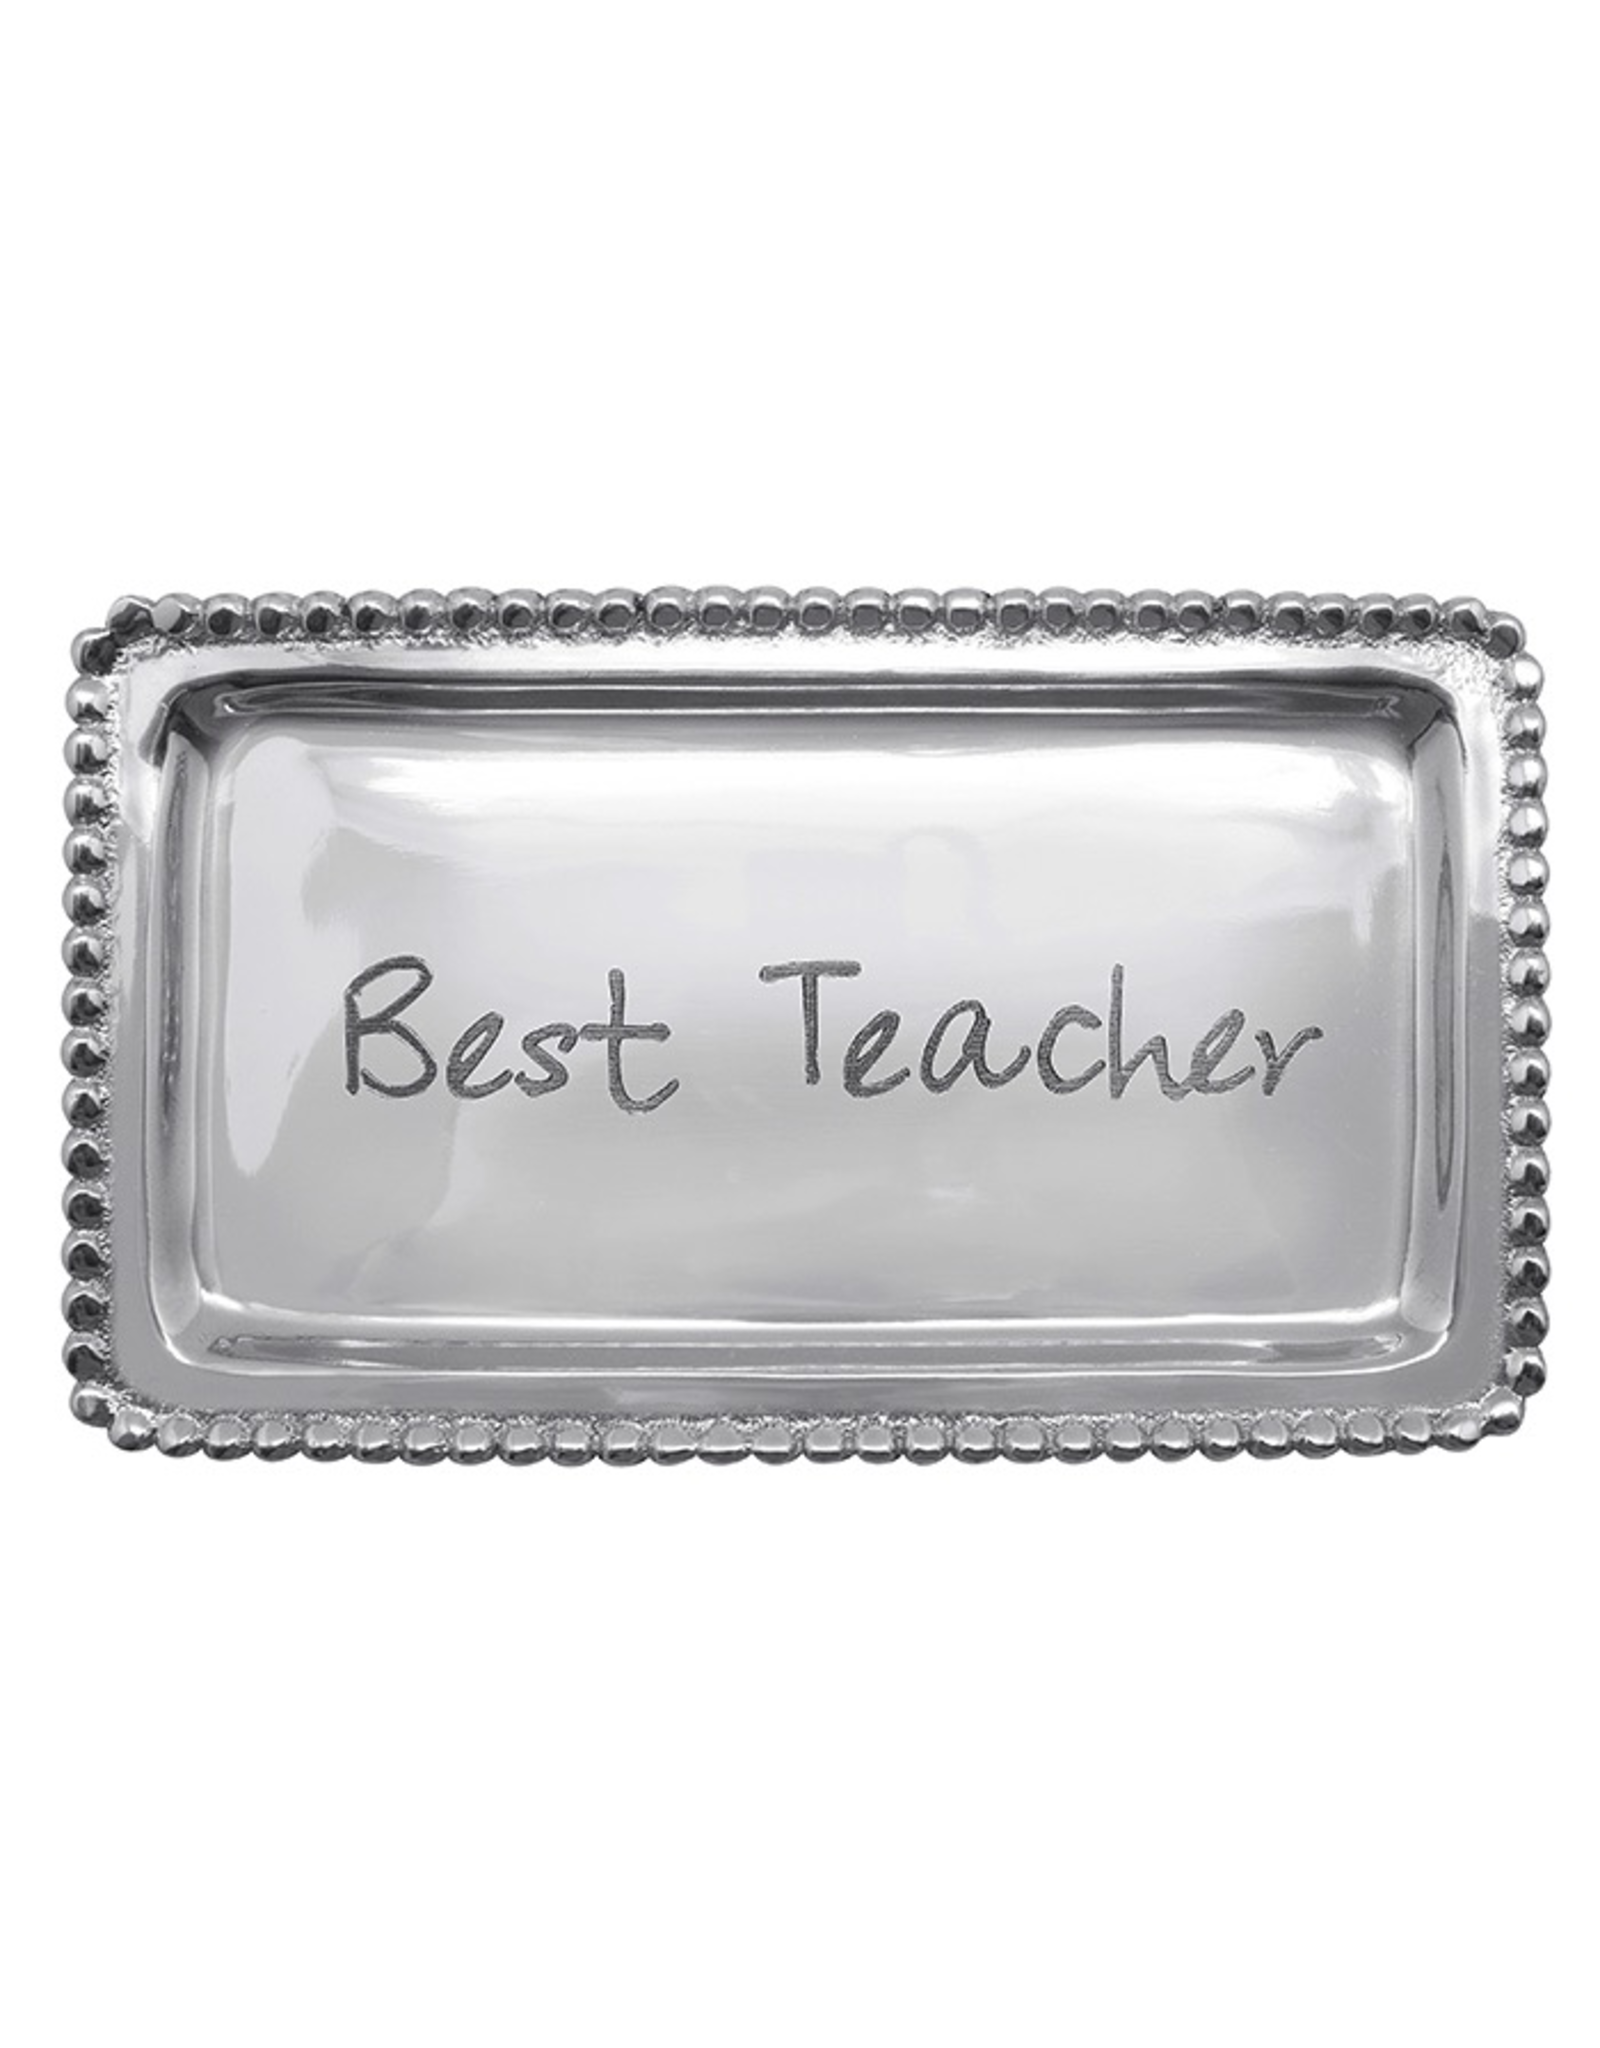 Mariposa Engraved Sentiment Tray Engraved With - Best Teacher